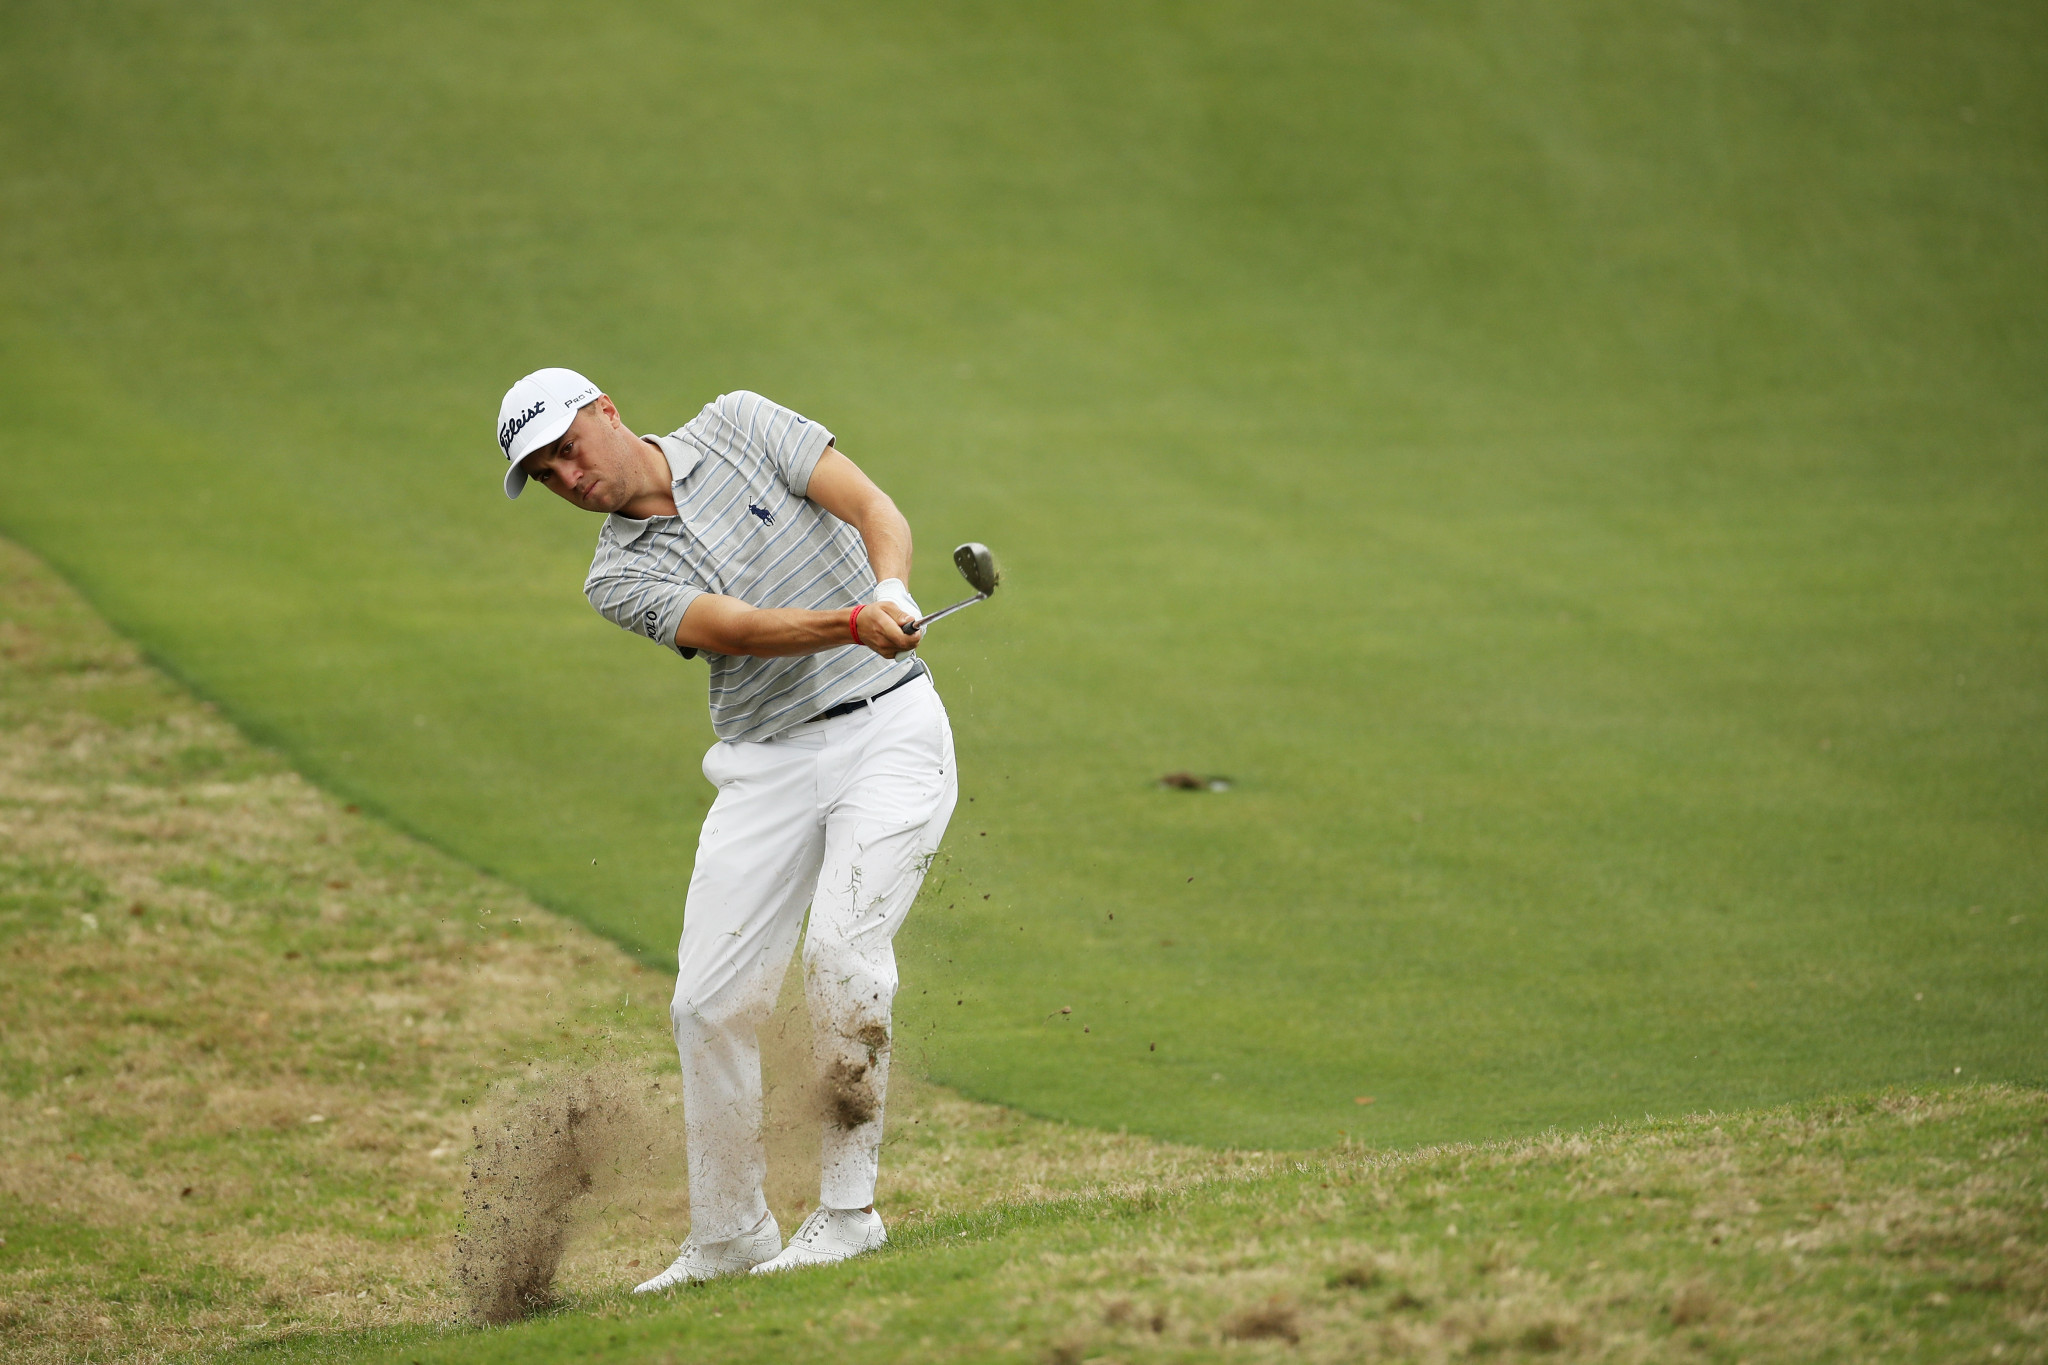 Justin Thomas of the United States was among the players to progress to the knock-out stage of the tournament ©Getty Images